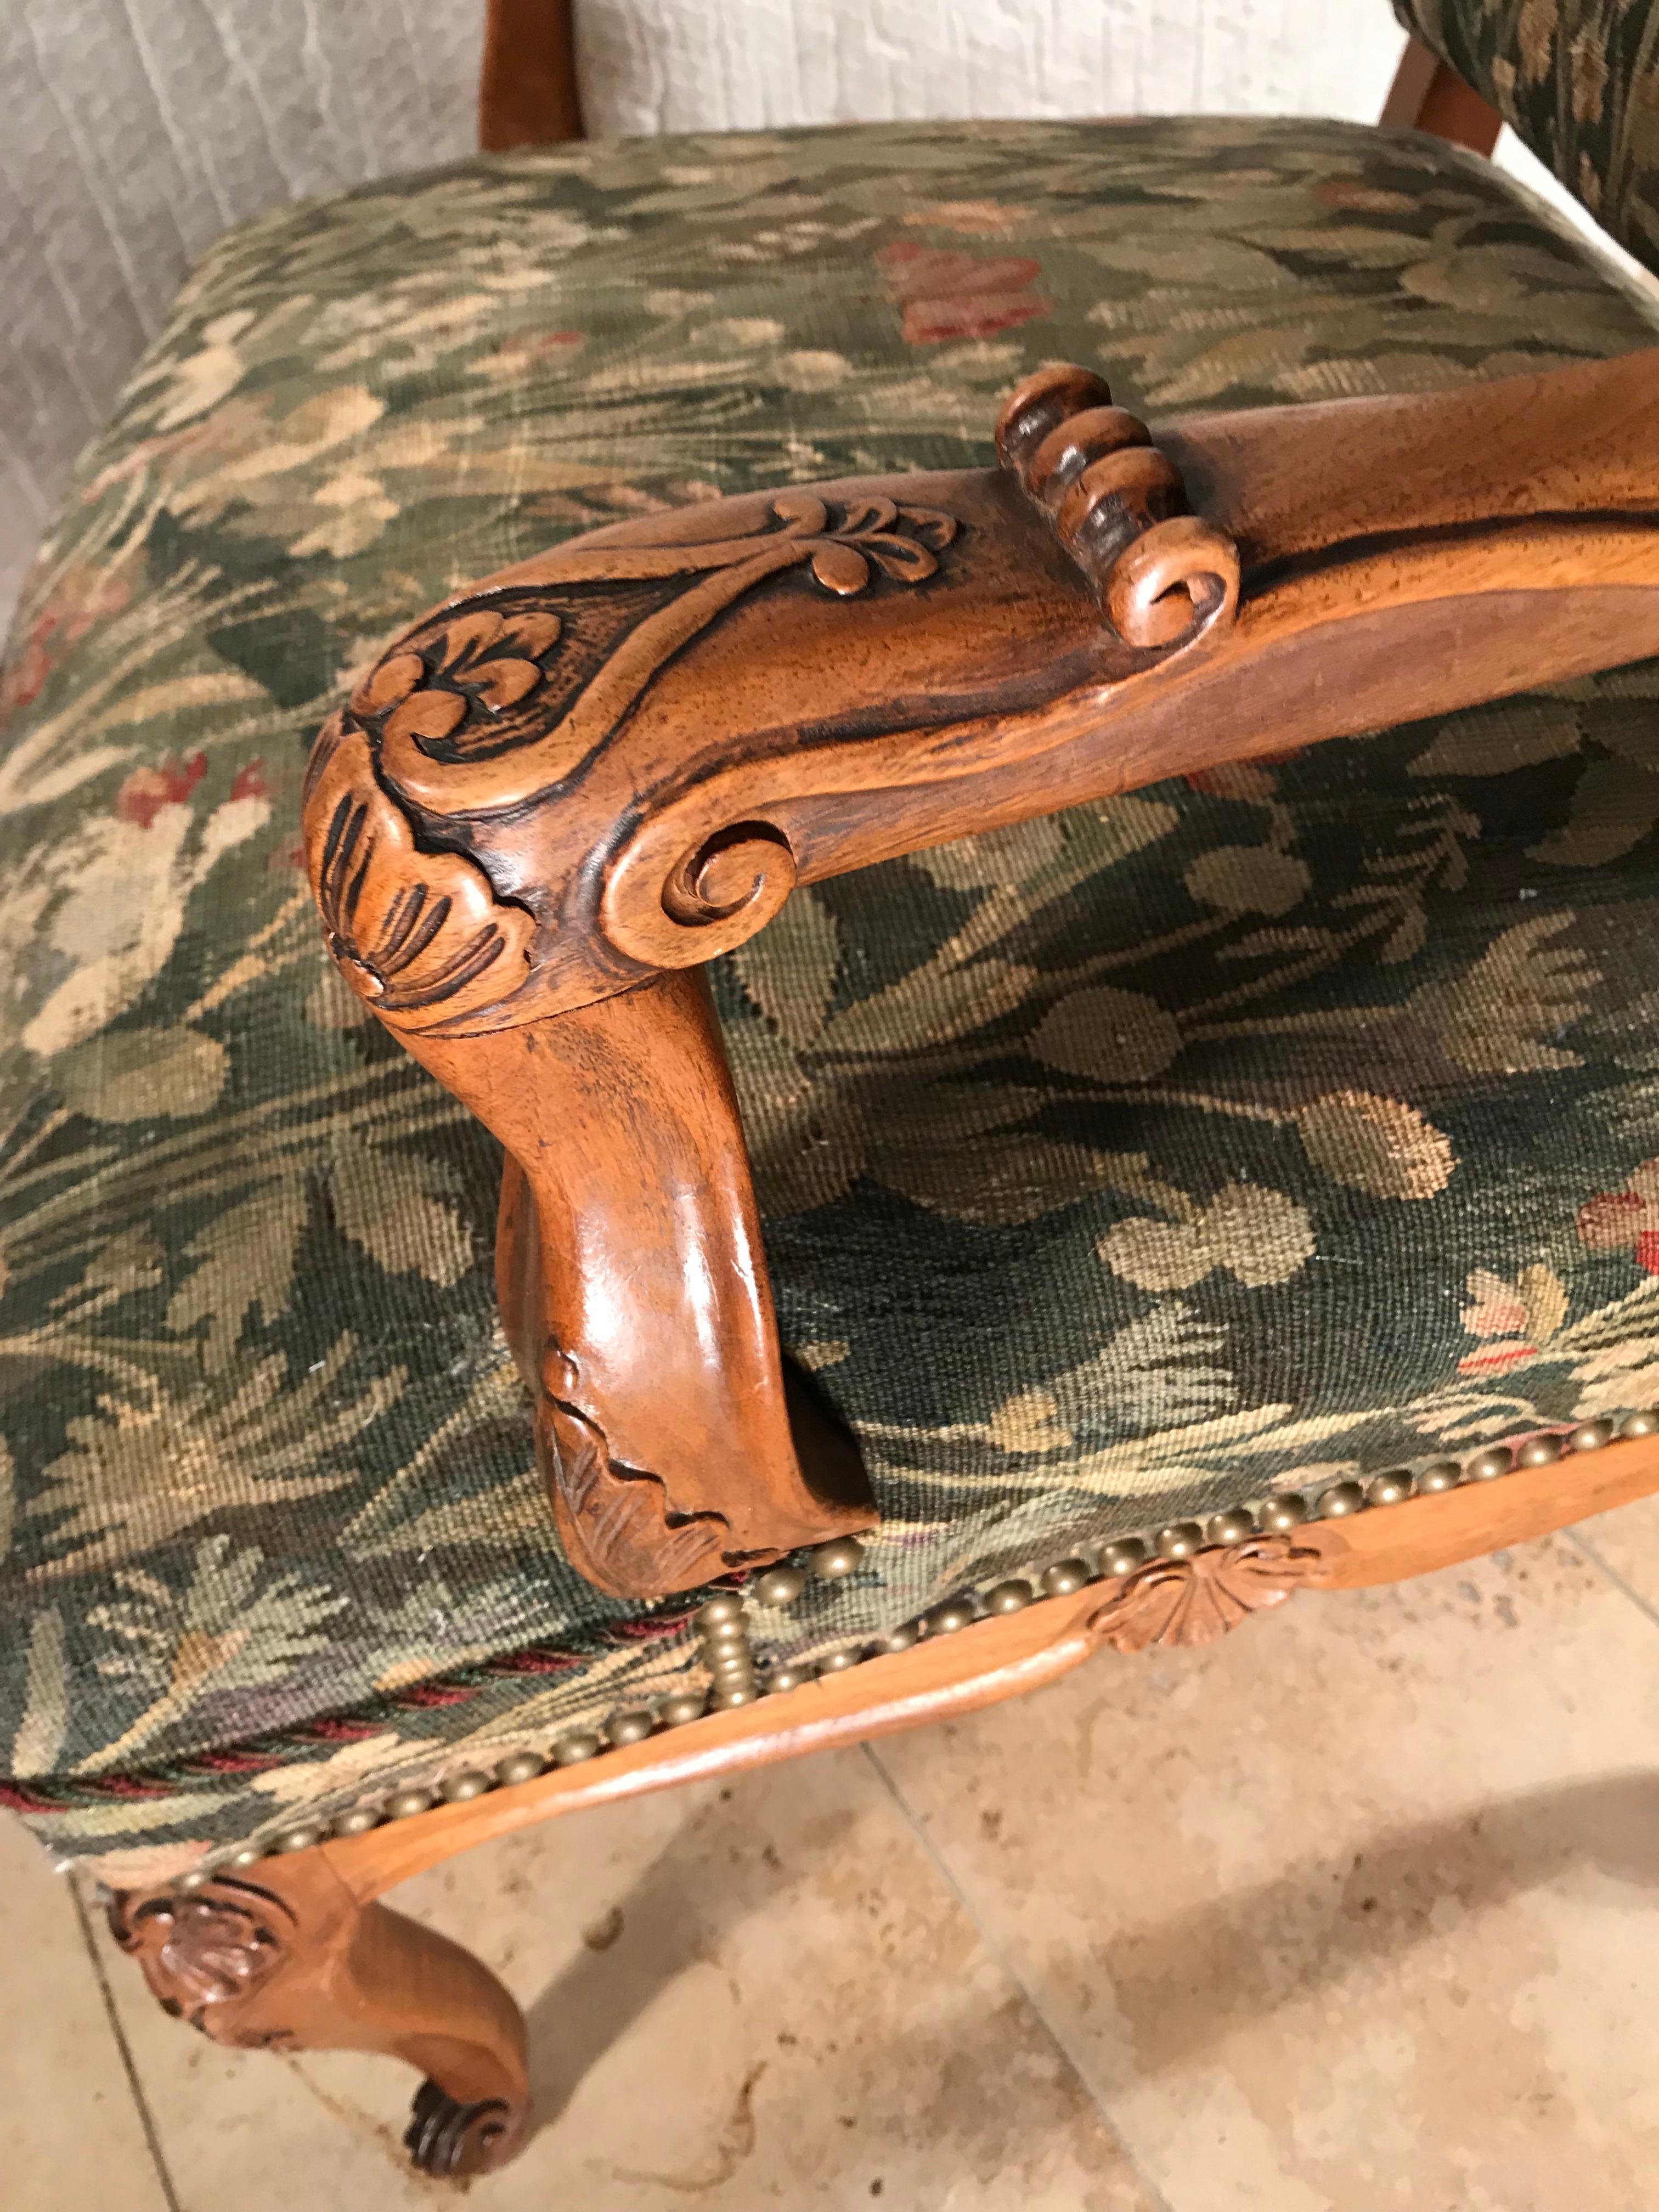 Baroque Armchair, South Germany 19th century, walnut finely carved. Covered with a beautiful gobelin. In good condition. The armchair chair will be shipped from Germany. Shipping costs to Boston are included.